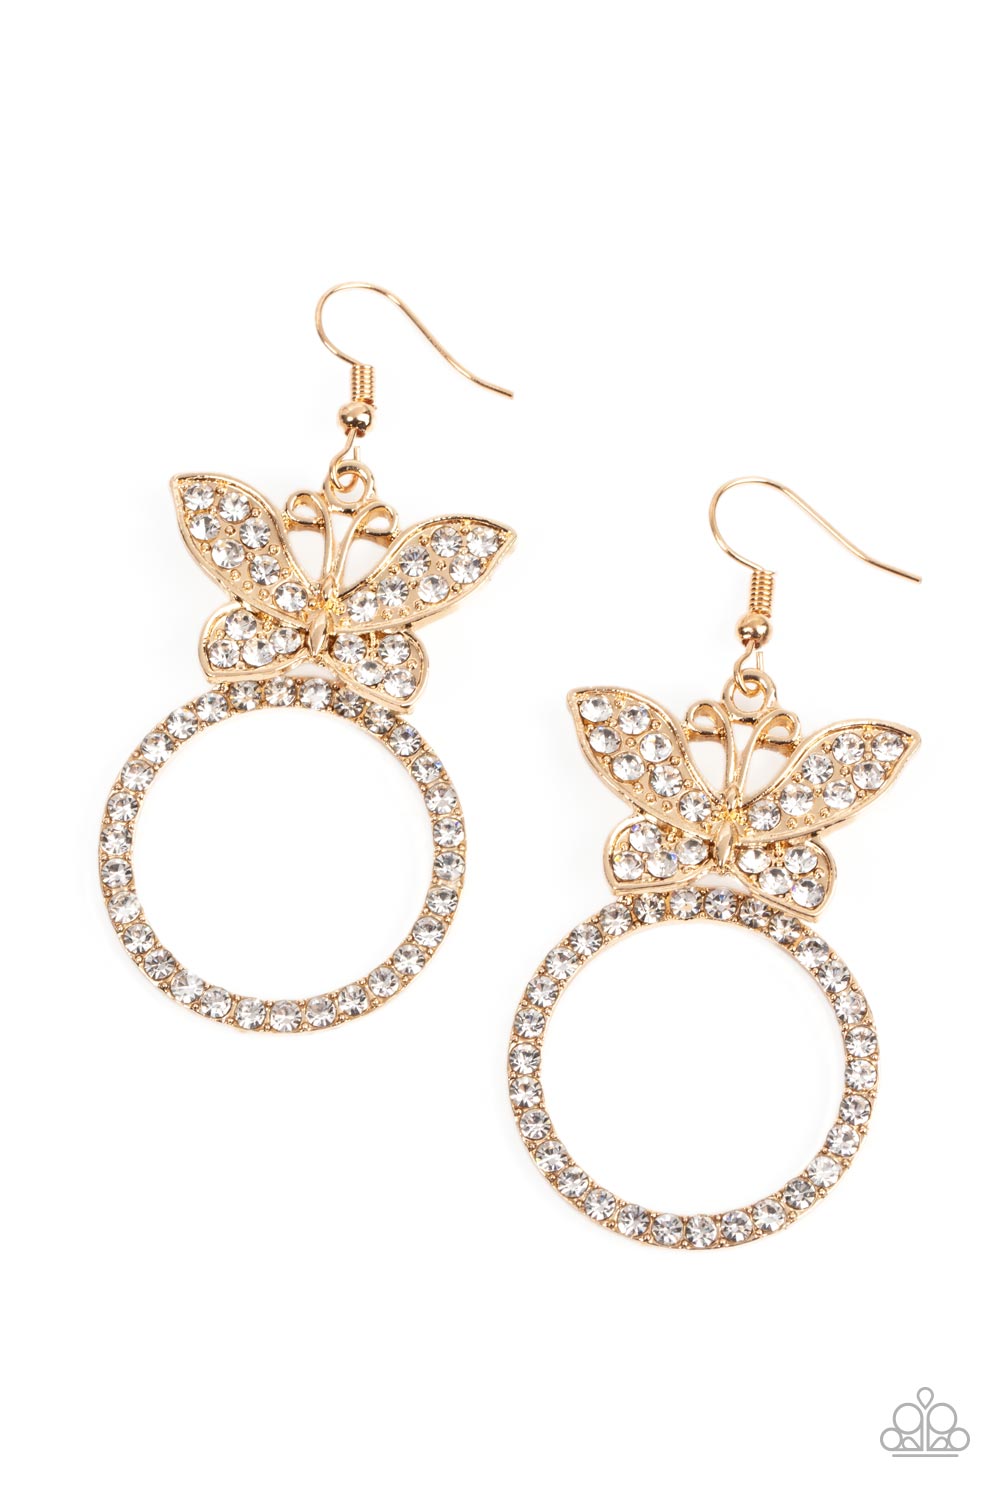 Paradise Found - Gold with Rhinestone Butterfly Earrings - Paparazzi Accessories